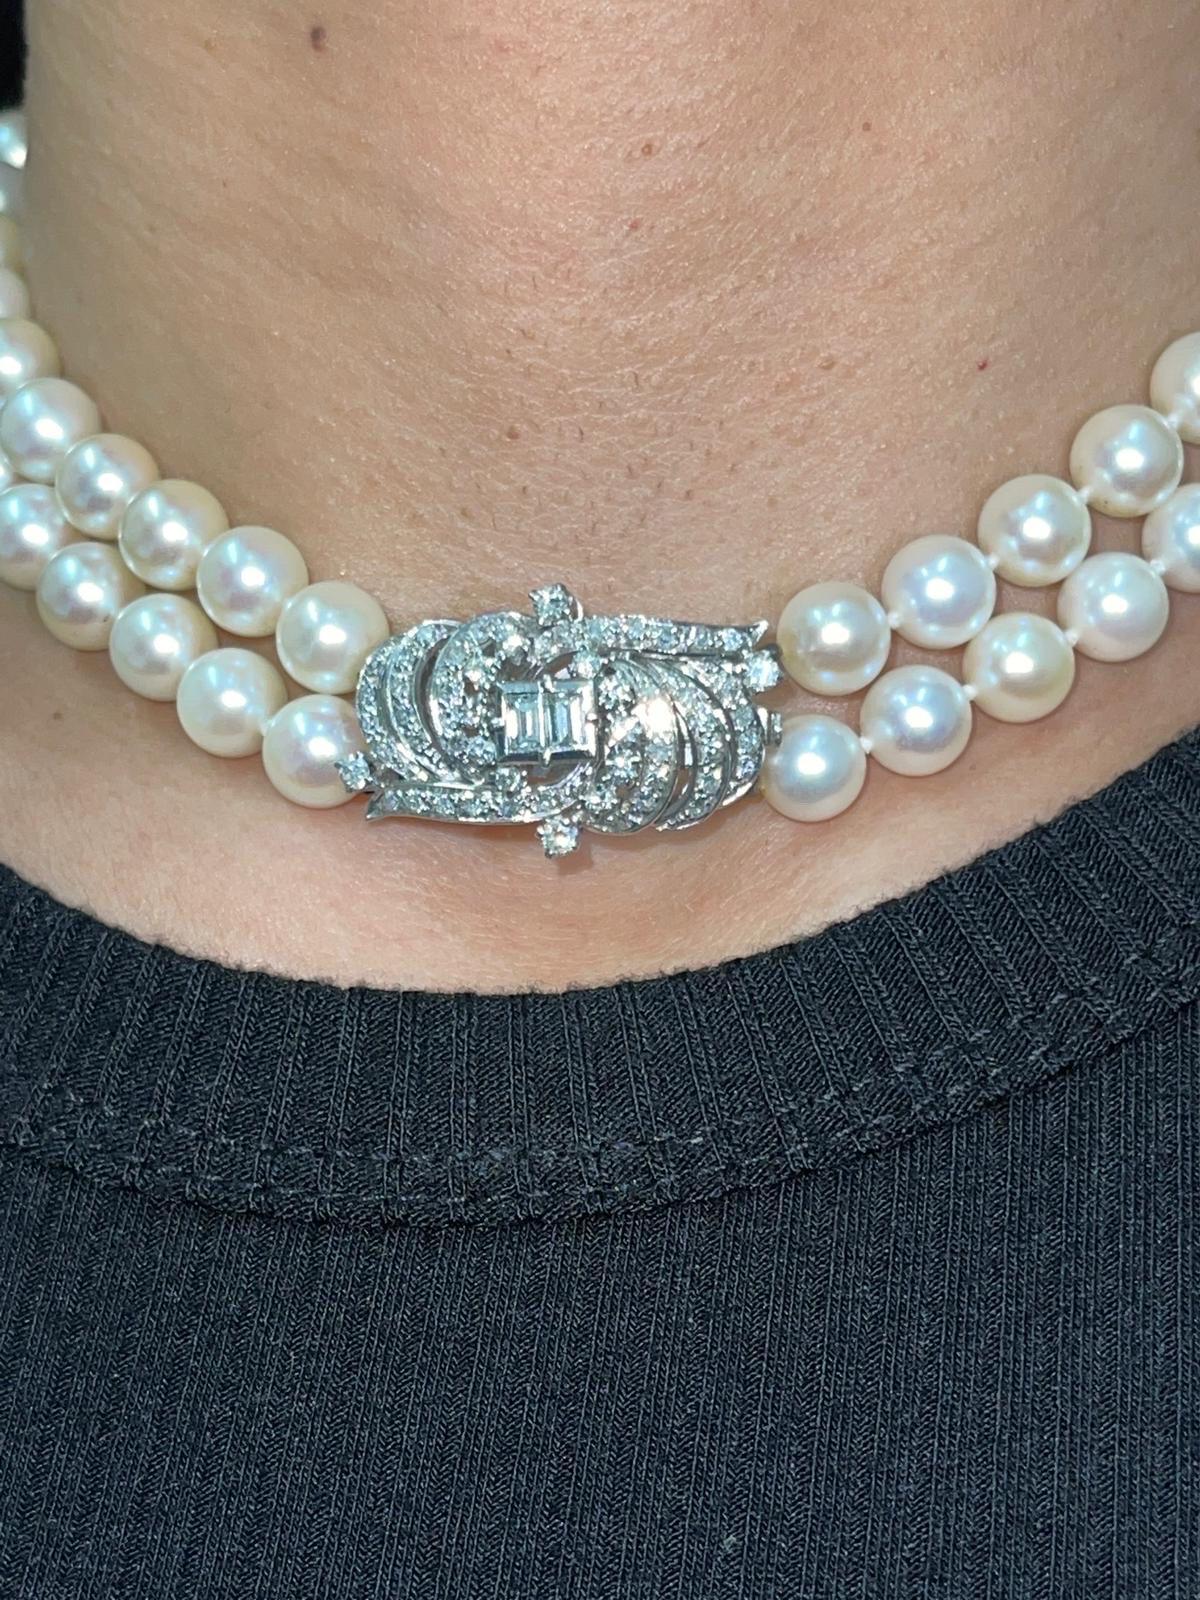 Antique 5.00 Carat Diamonds and Pearls Choker Necklace 18k White Gold For Sale 2